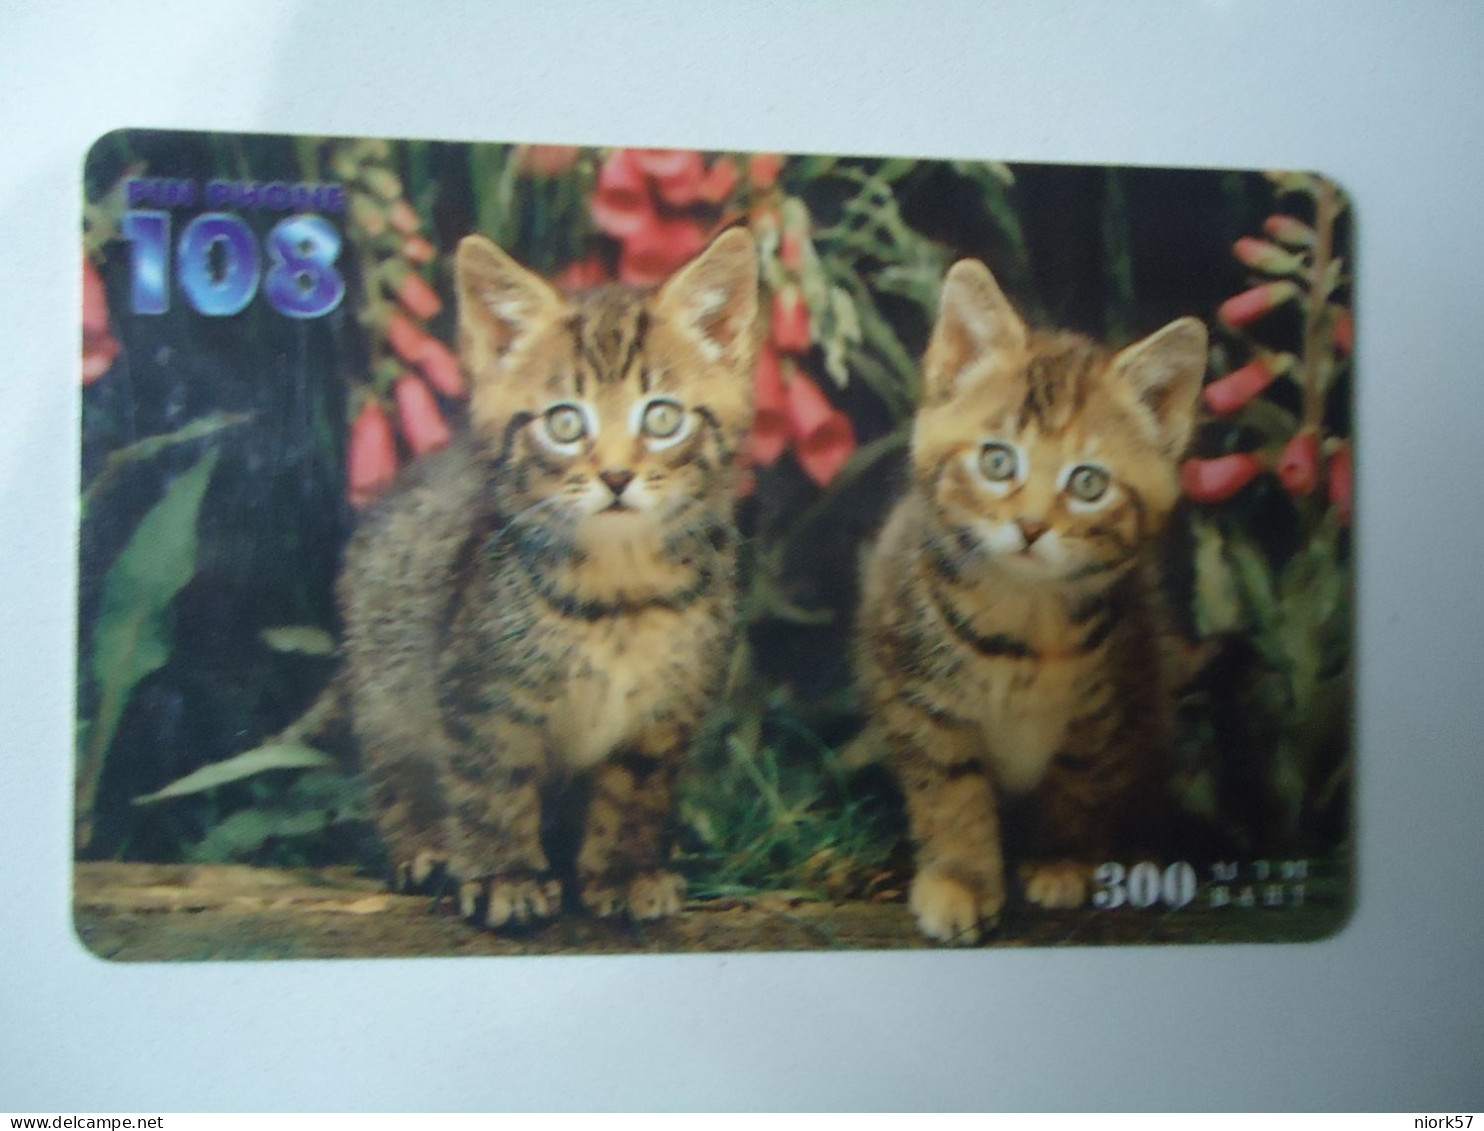 THAILAND USED  CARDS PIN 108 FLOWERS TREE  CATS UNITS 300 - Gatti